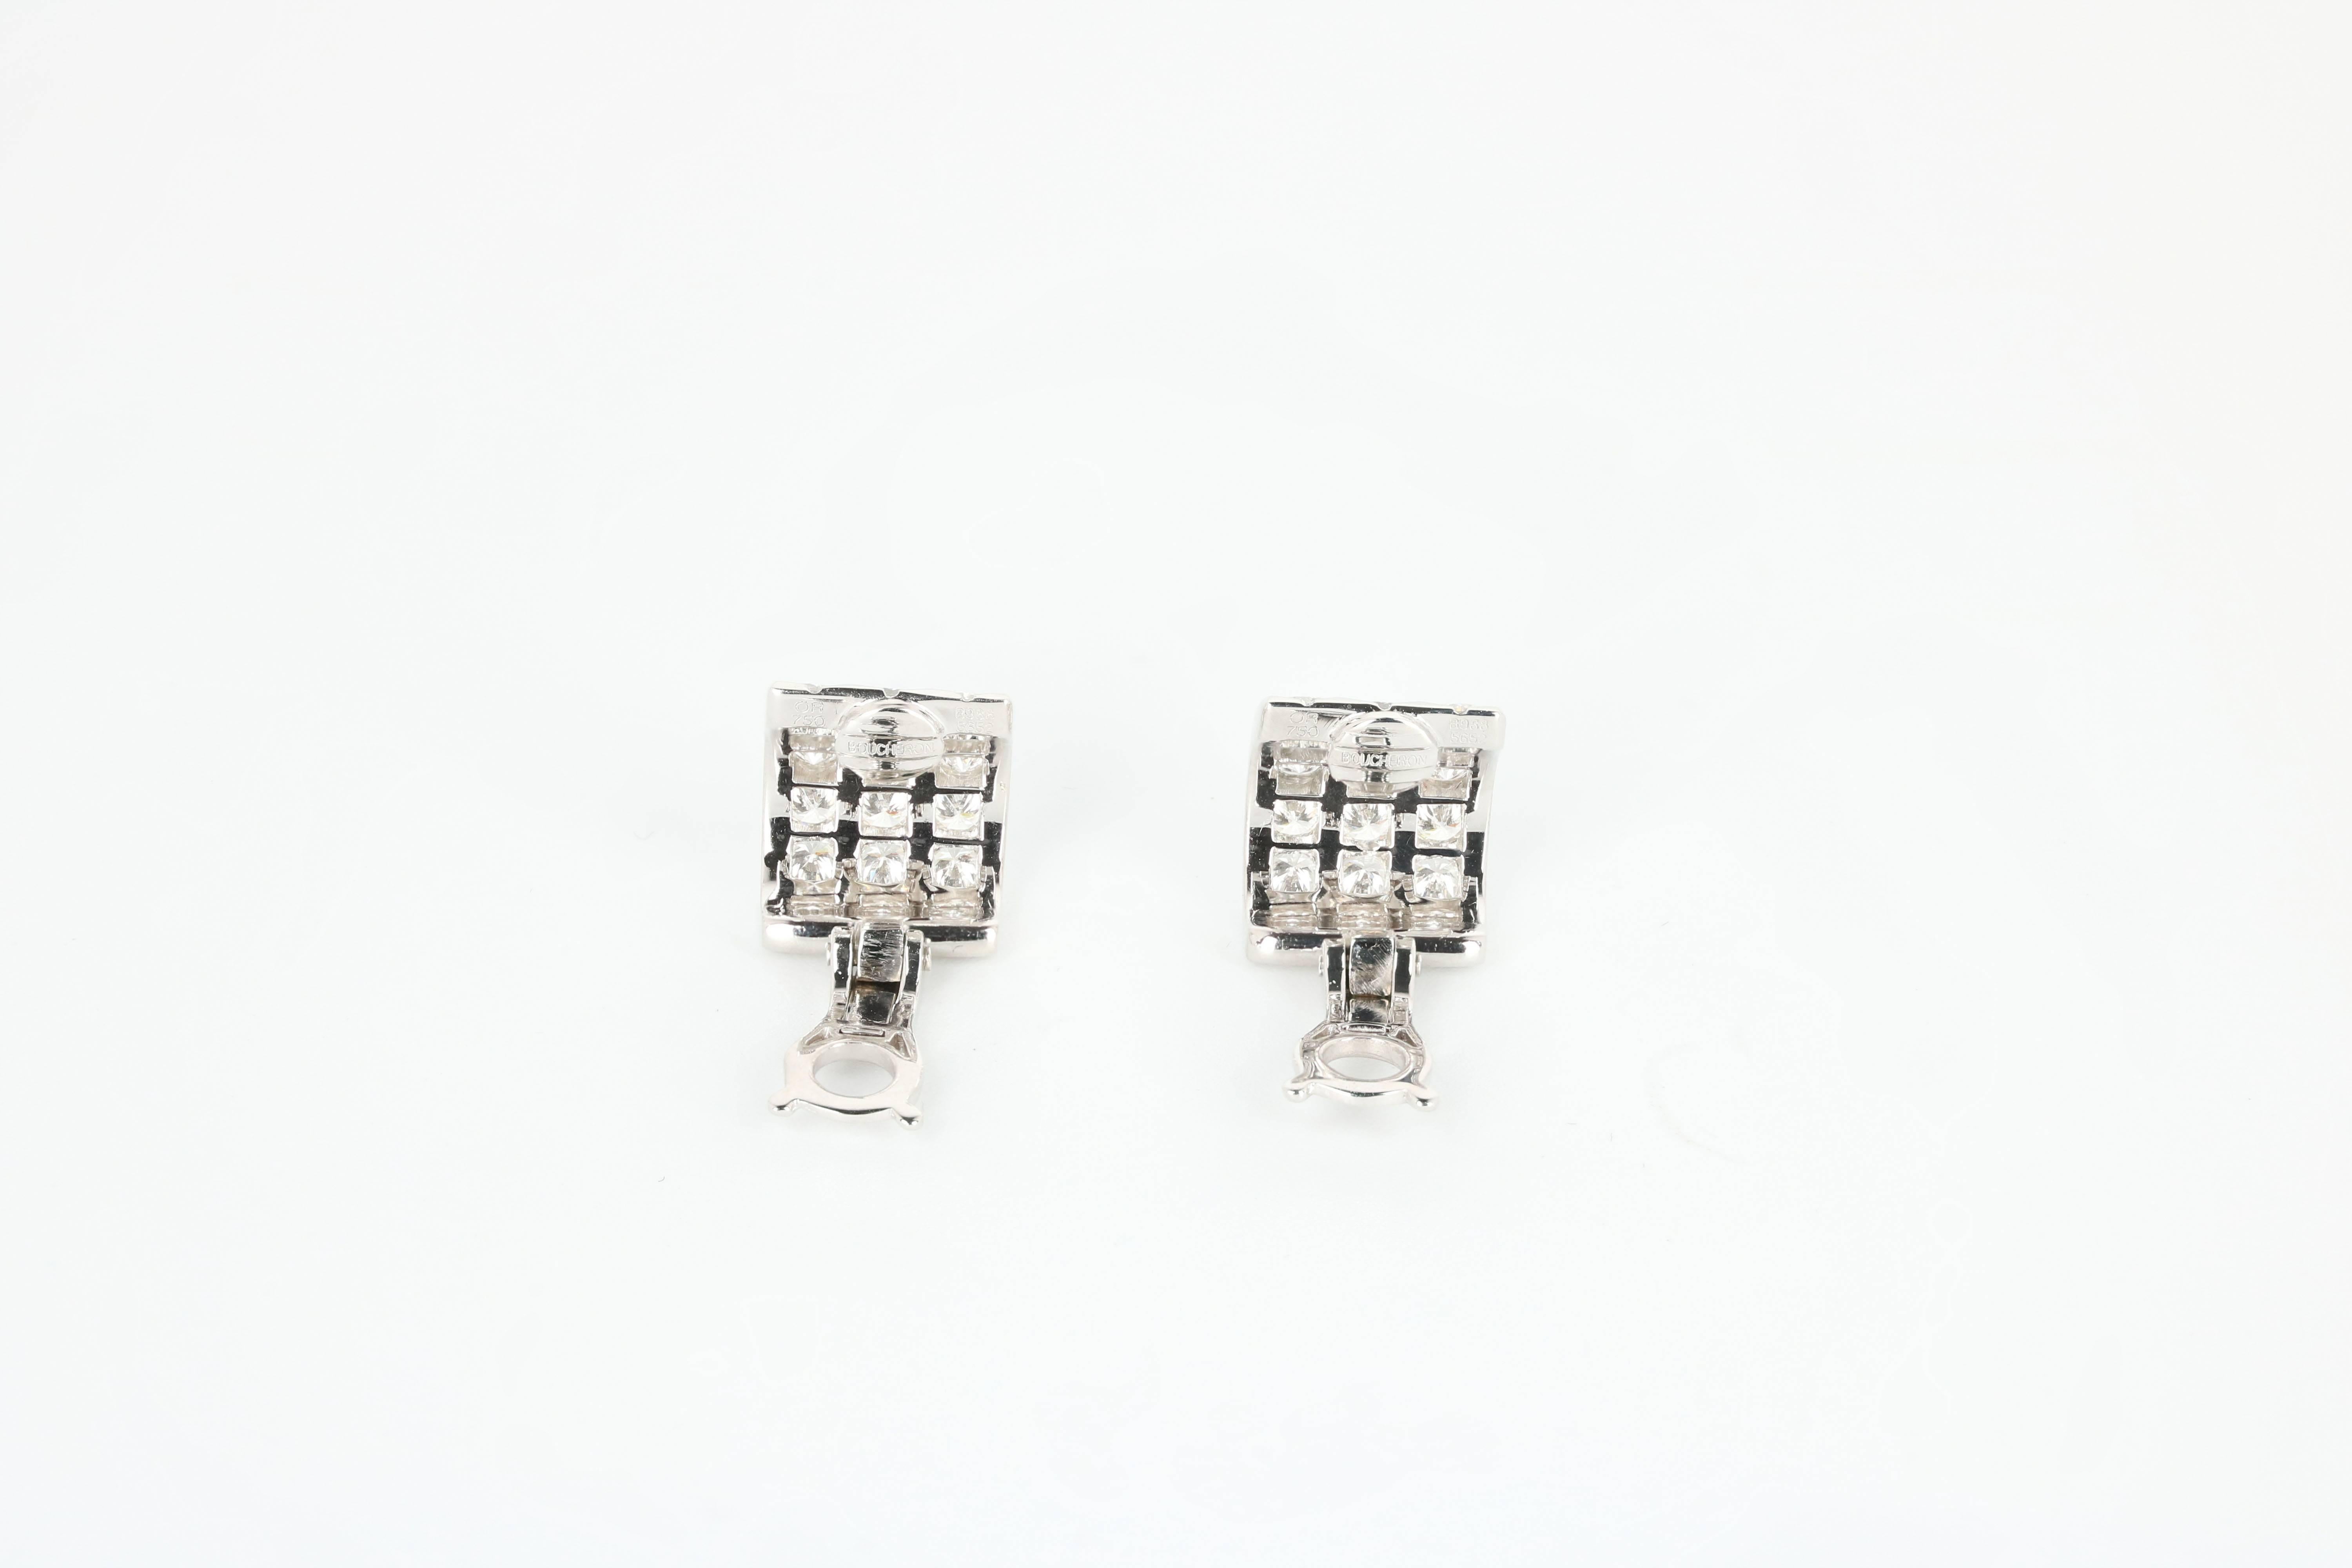 Boucheron "Ligne" Ear Clips with Diamonds in 18K White Gold
Approximately 3 carat total weight